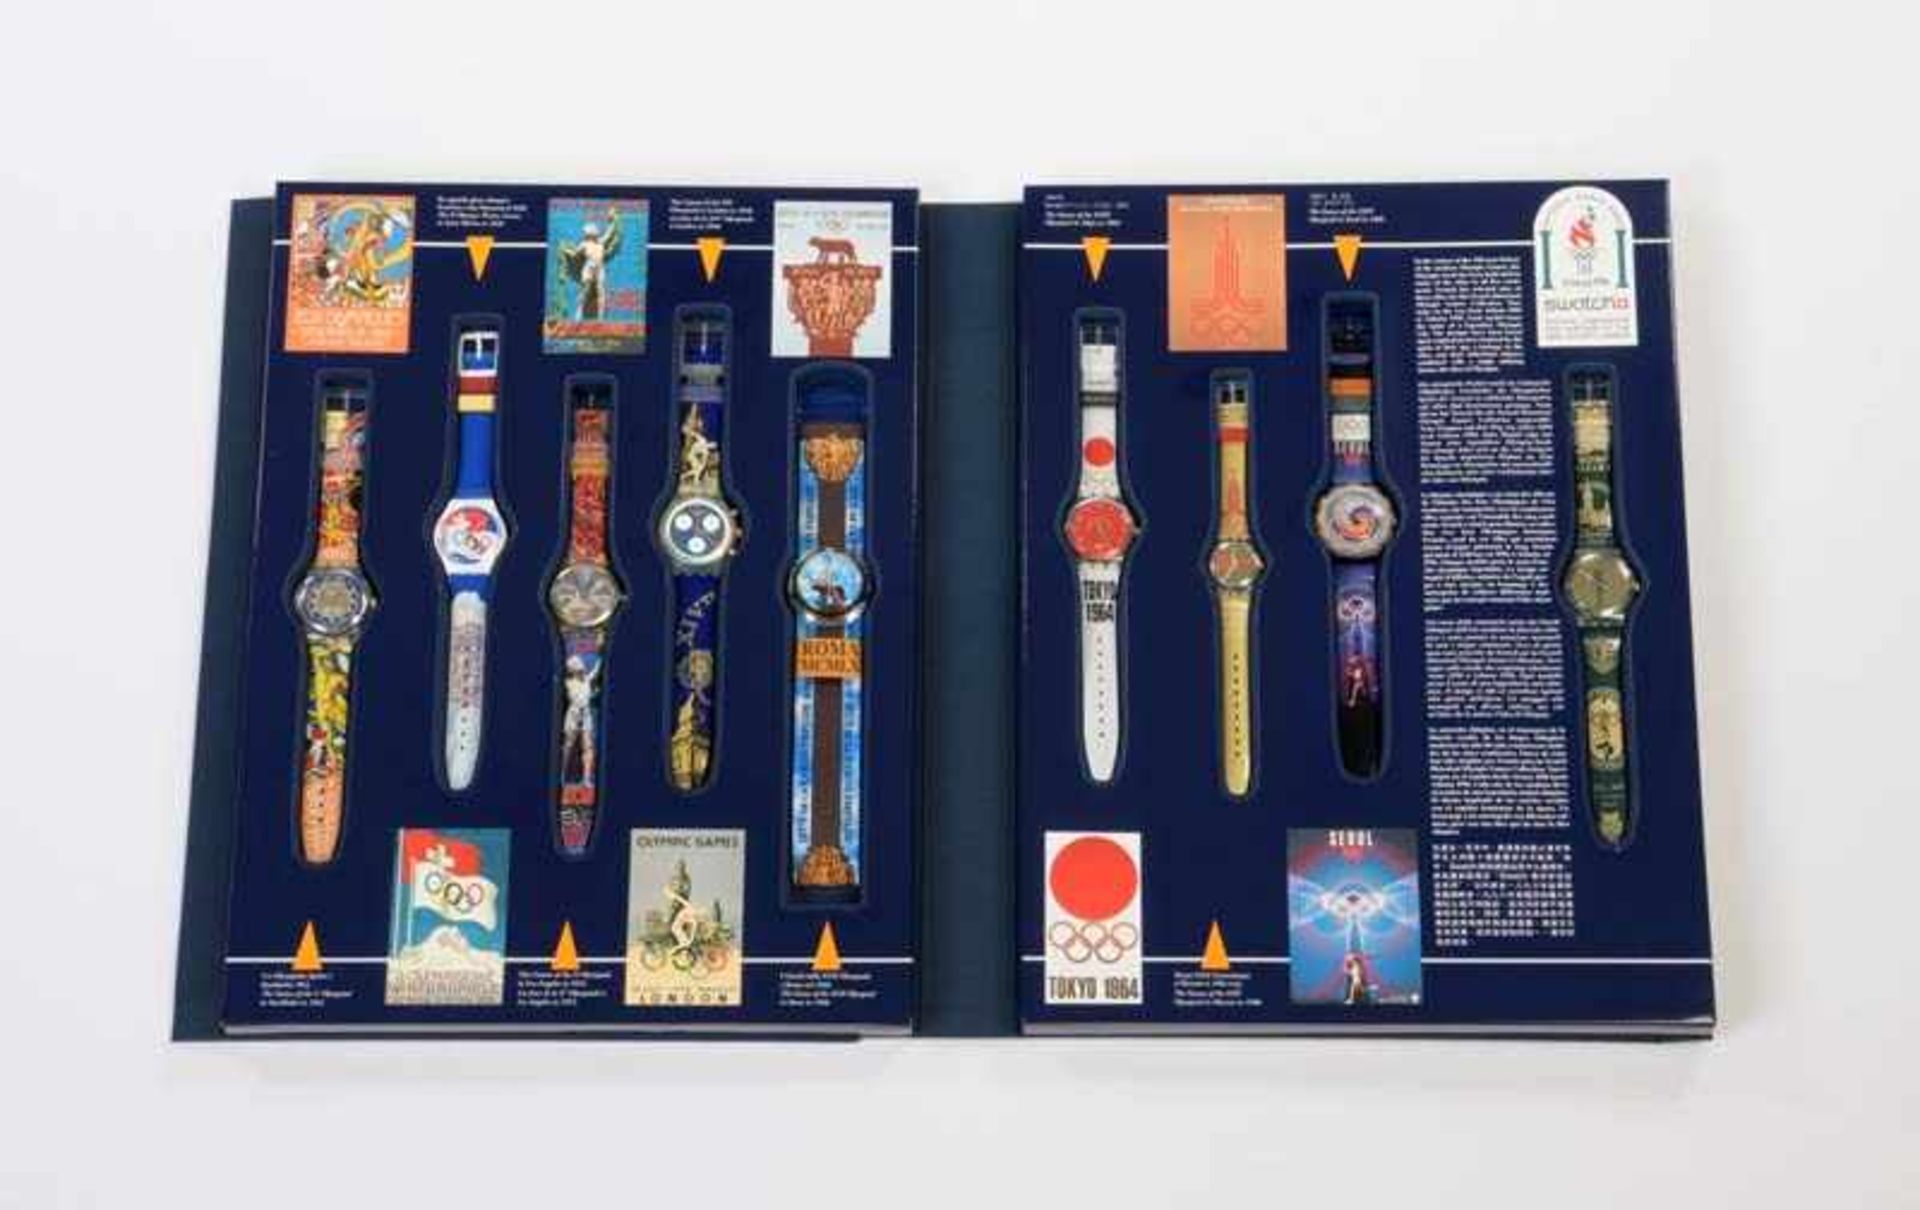 Swatch, Historical Olympic Games Collection 9 Uhren, Swiss made, Box 41x31 cm, Okt Z 1, Z 1